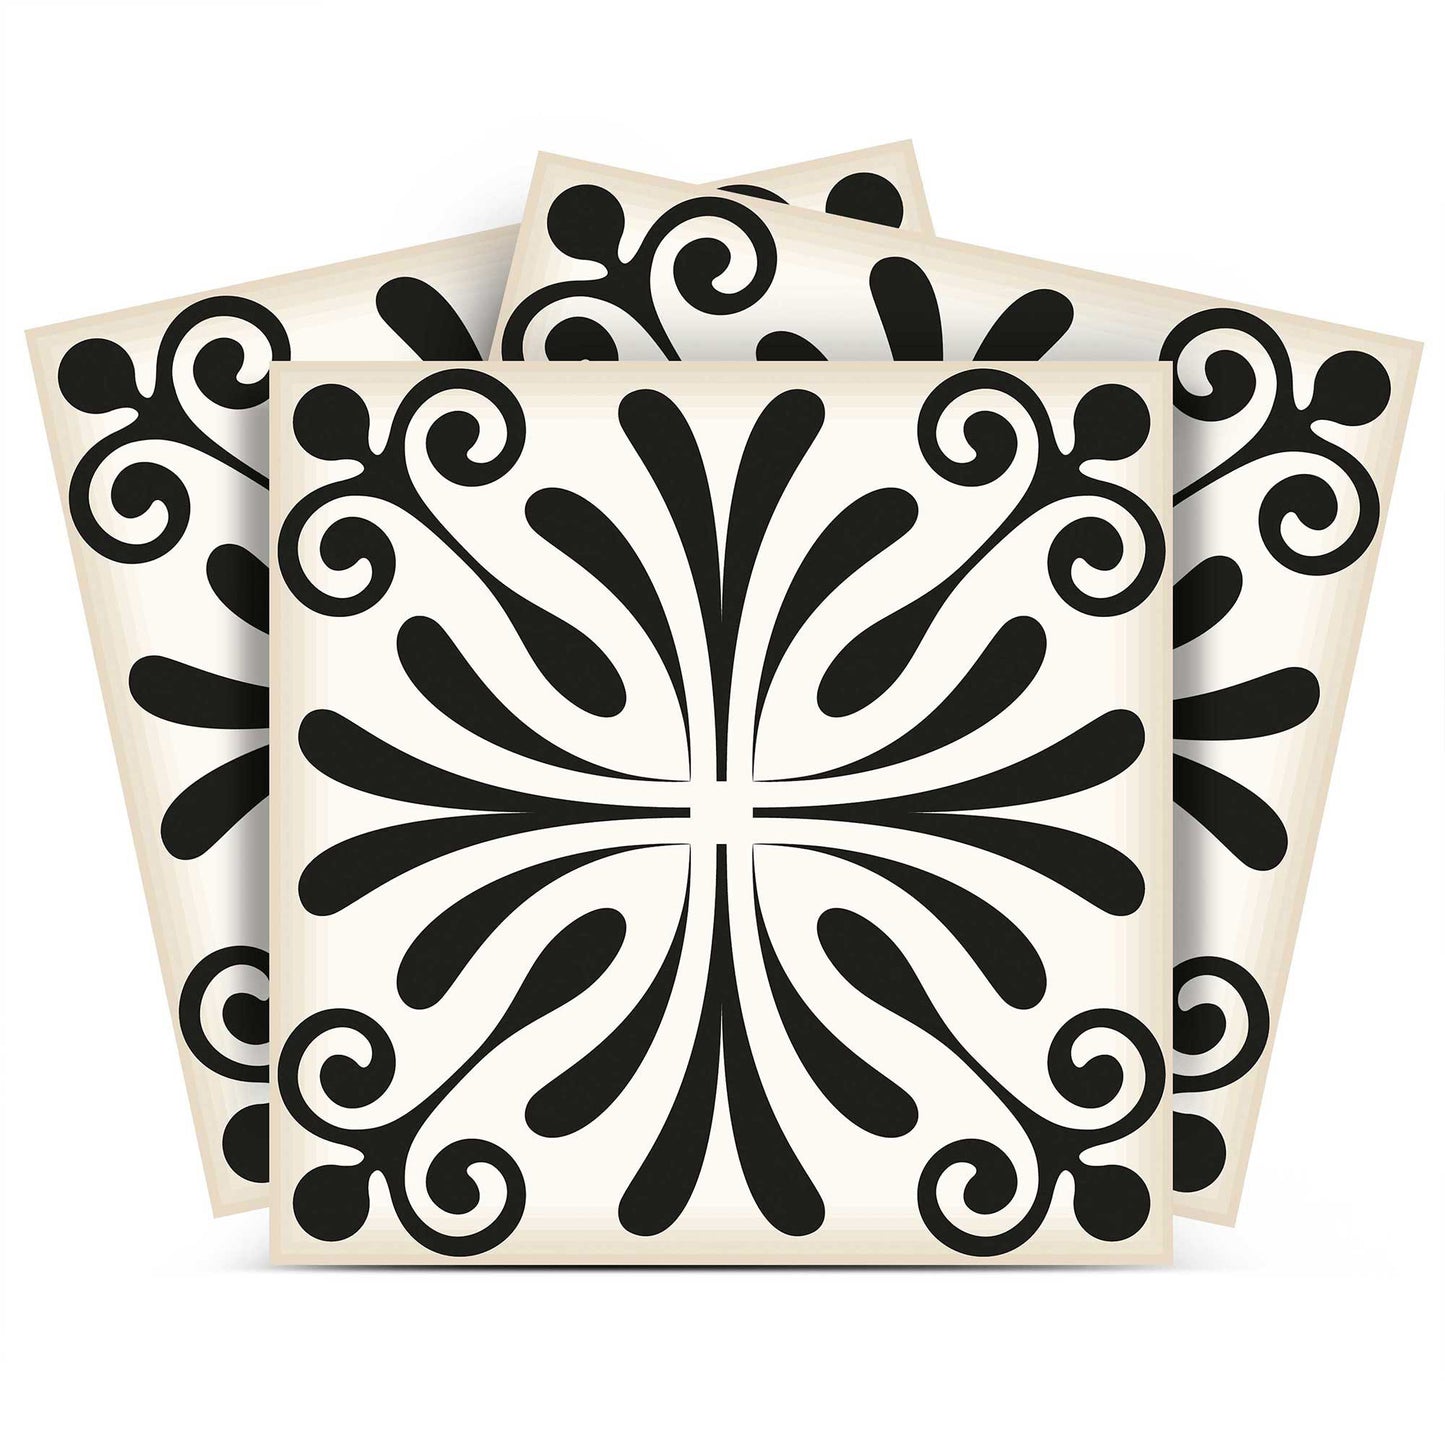 8" X 8" Black and White Flo Peel and Stick Removable Tiles